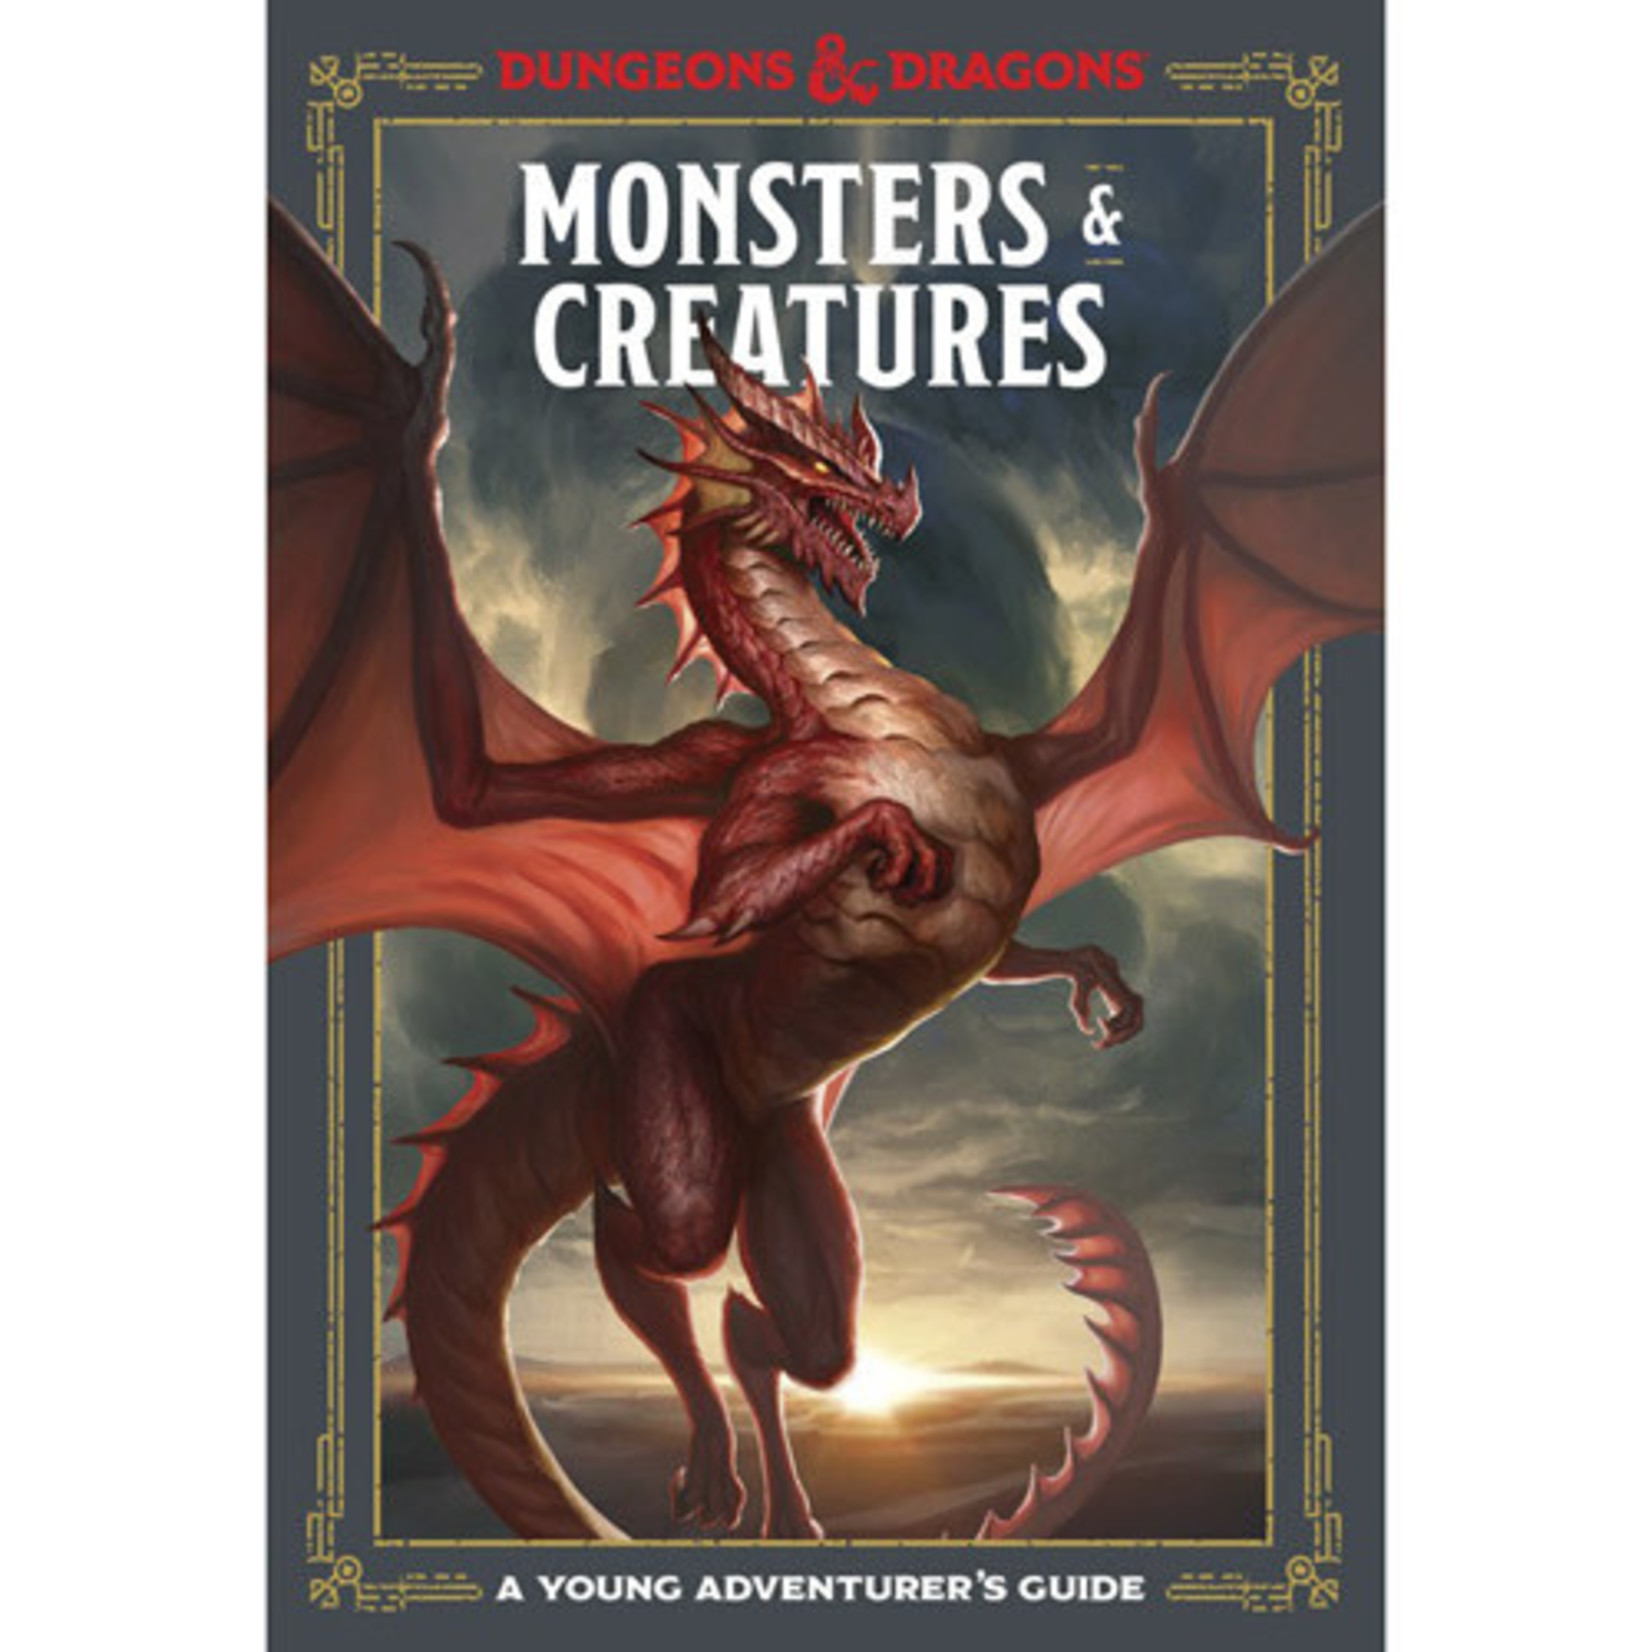 D&D 5E RPG: A Young Adventurer's Guide - Monsters & Creatures